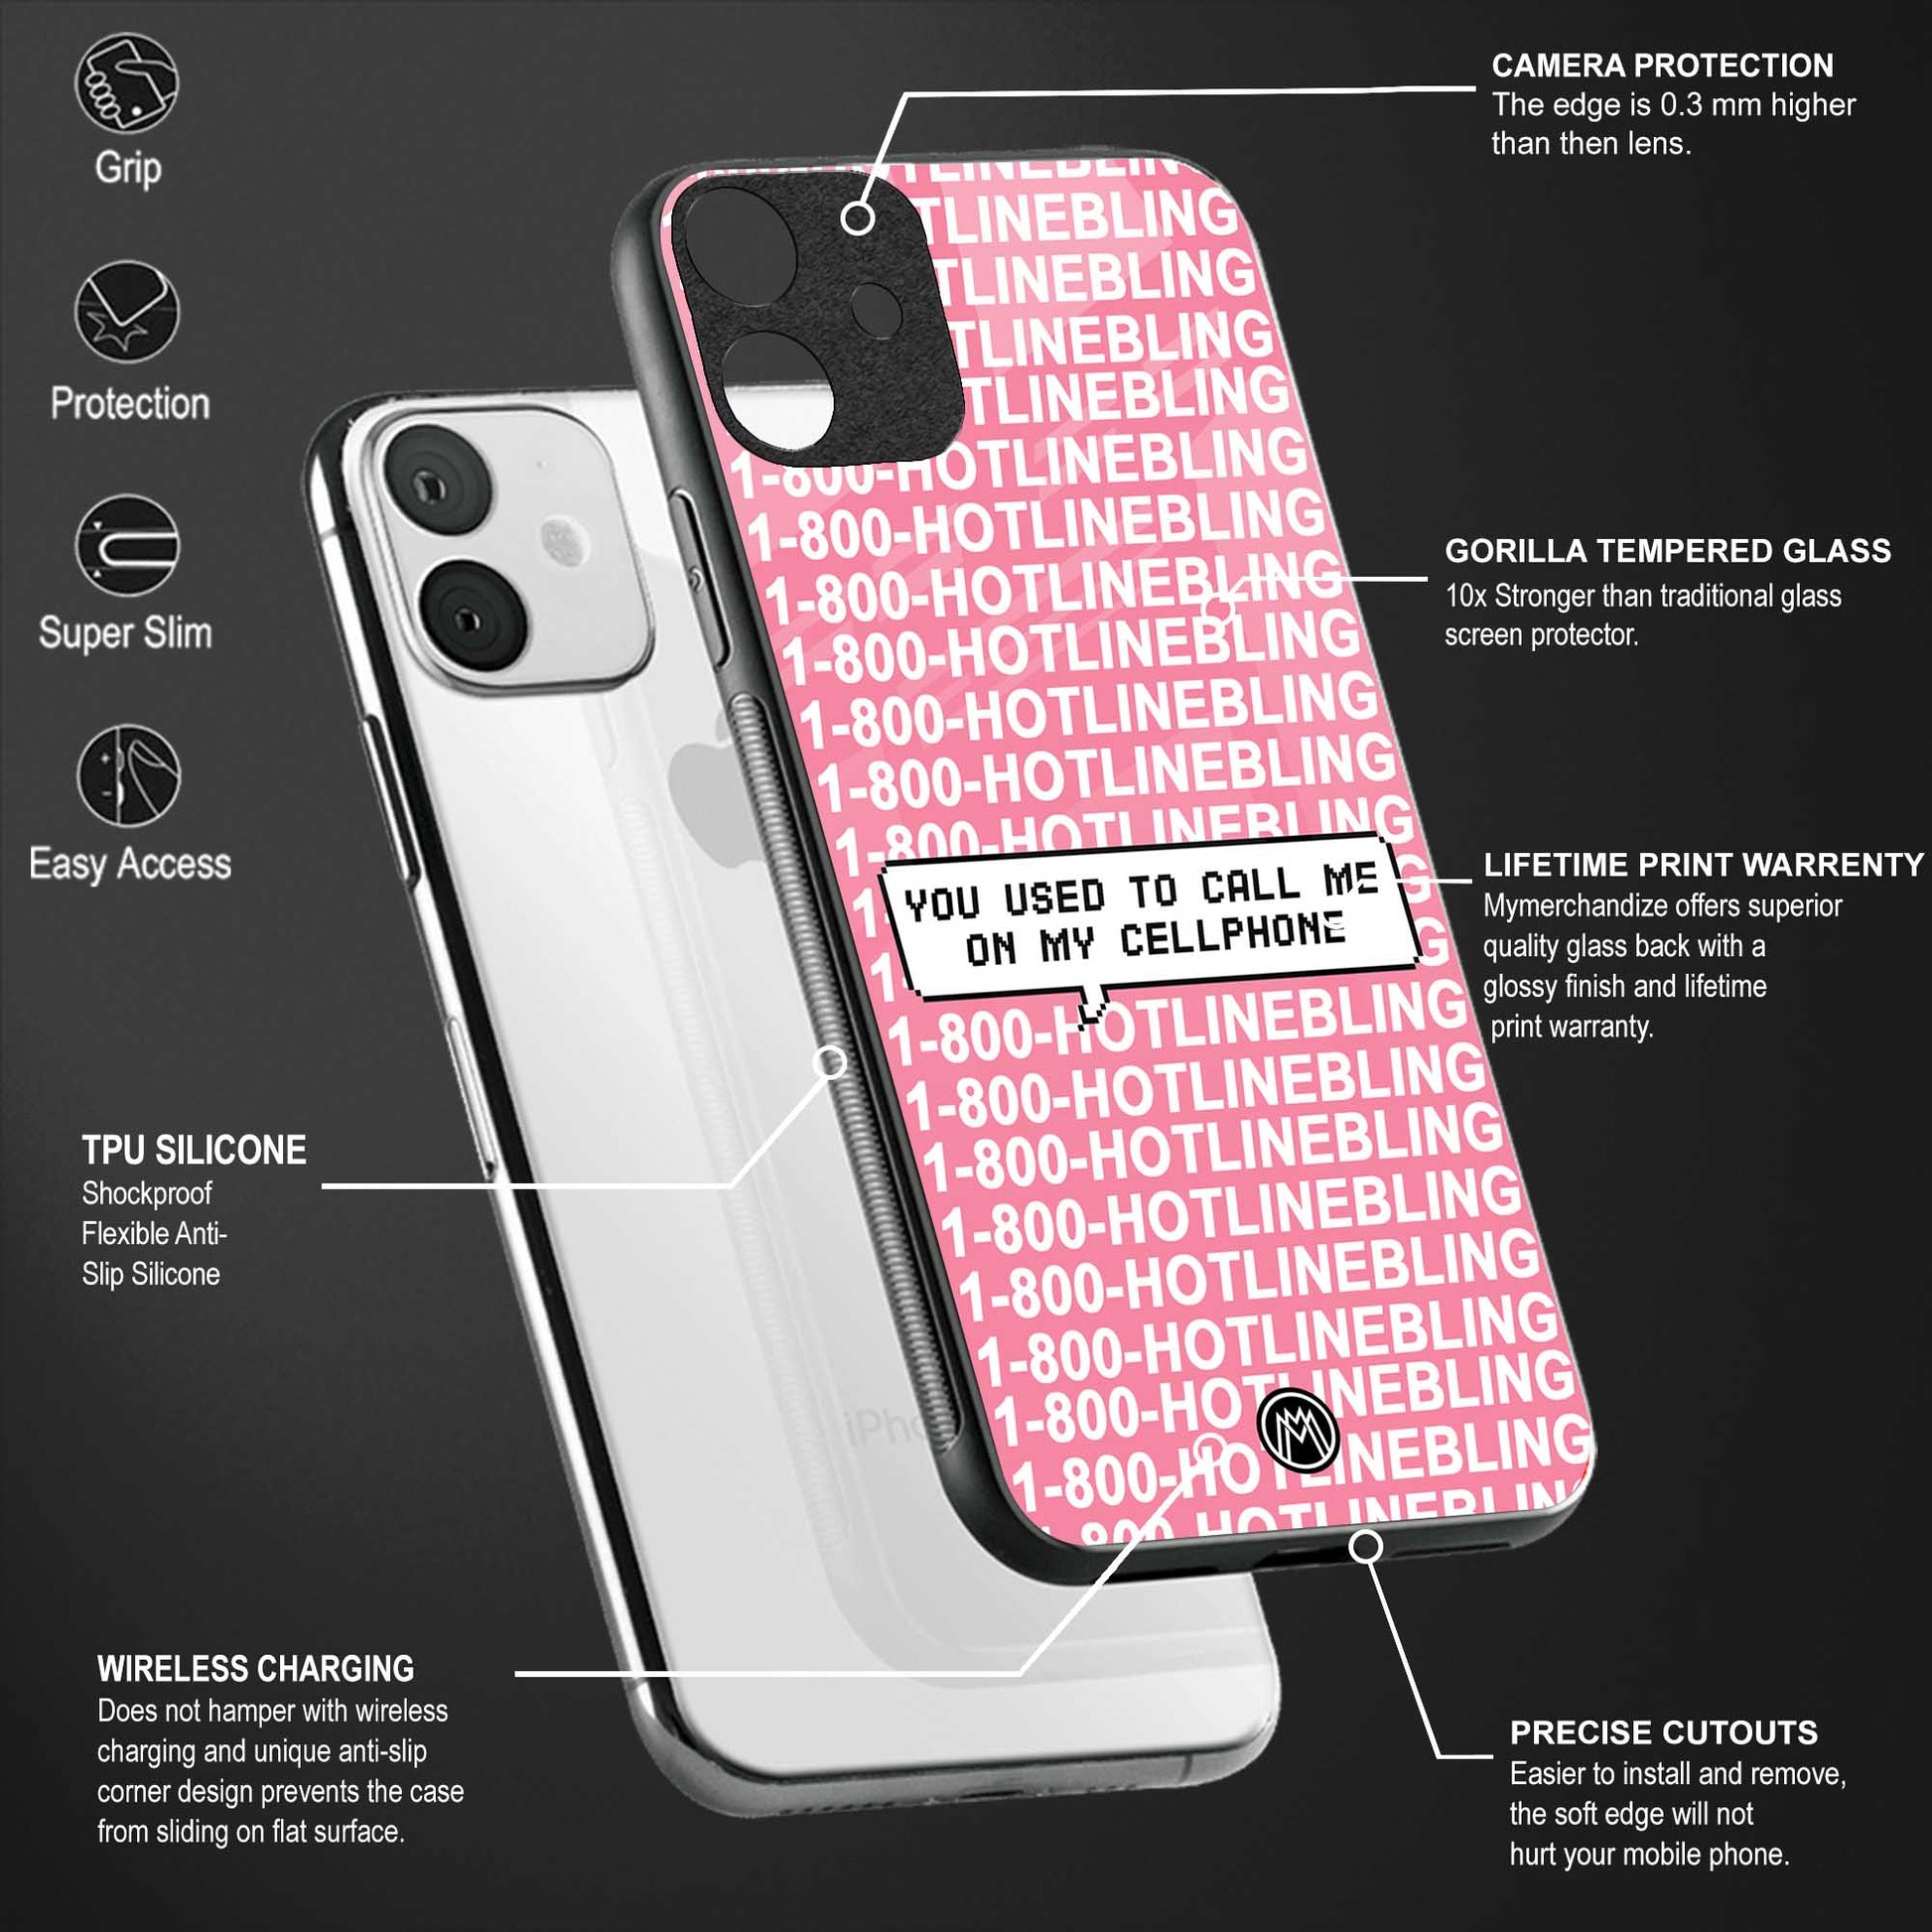 1800 hotline bling phone cover for samsung galaxy a52s 5g 